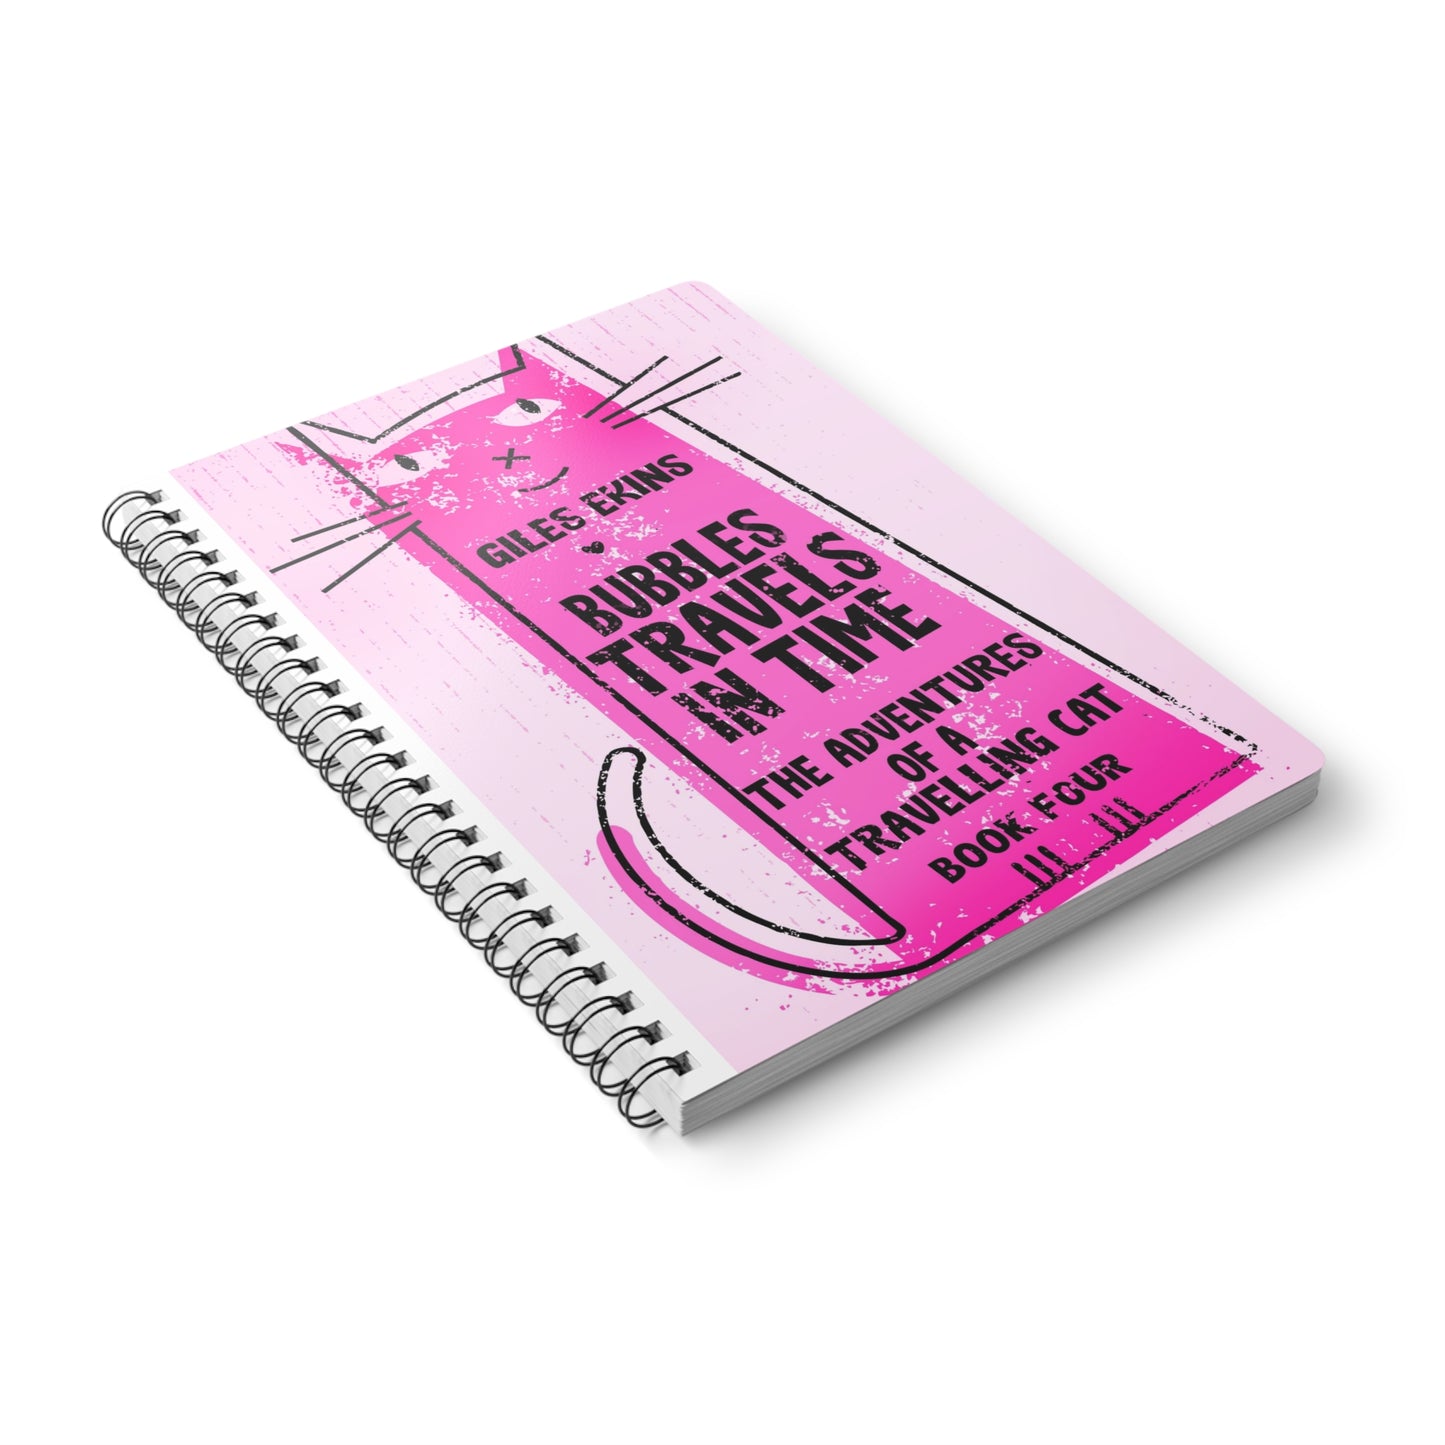 Bubbles Travels In Time - A5 Wirebound Notebook